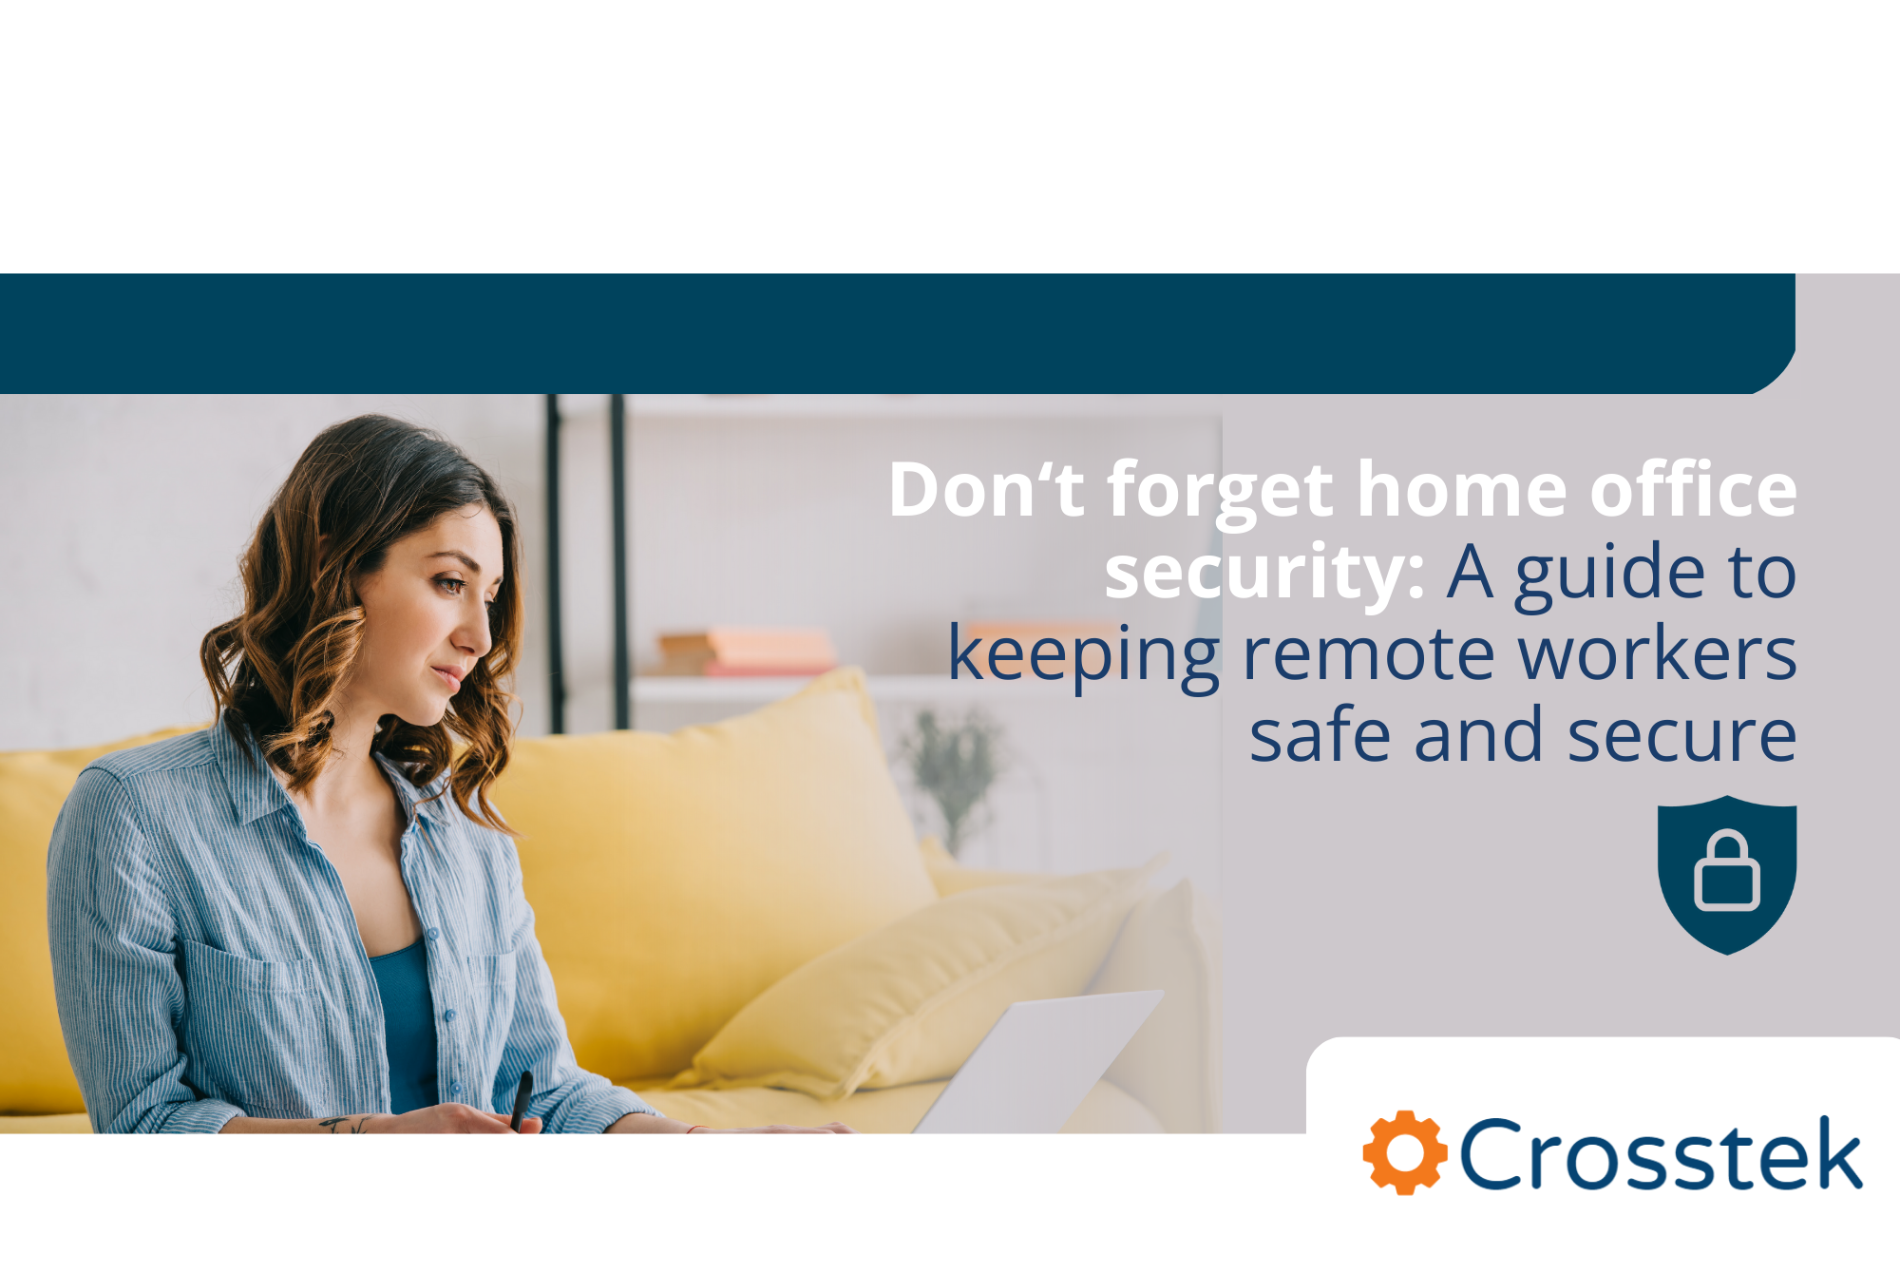 Don't forget home office security: a guide to keeping remote work safe and secure